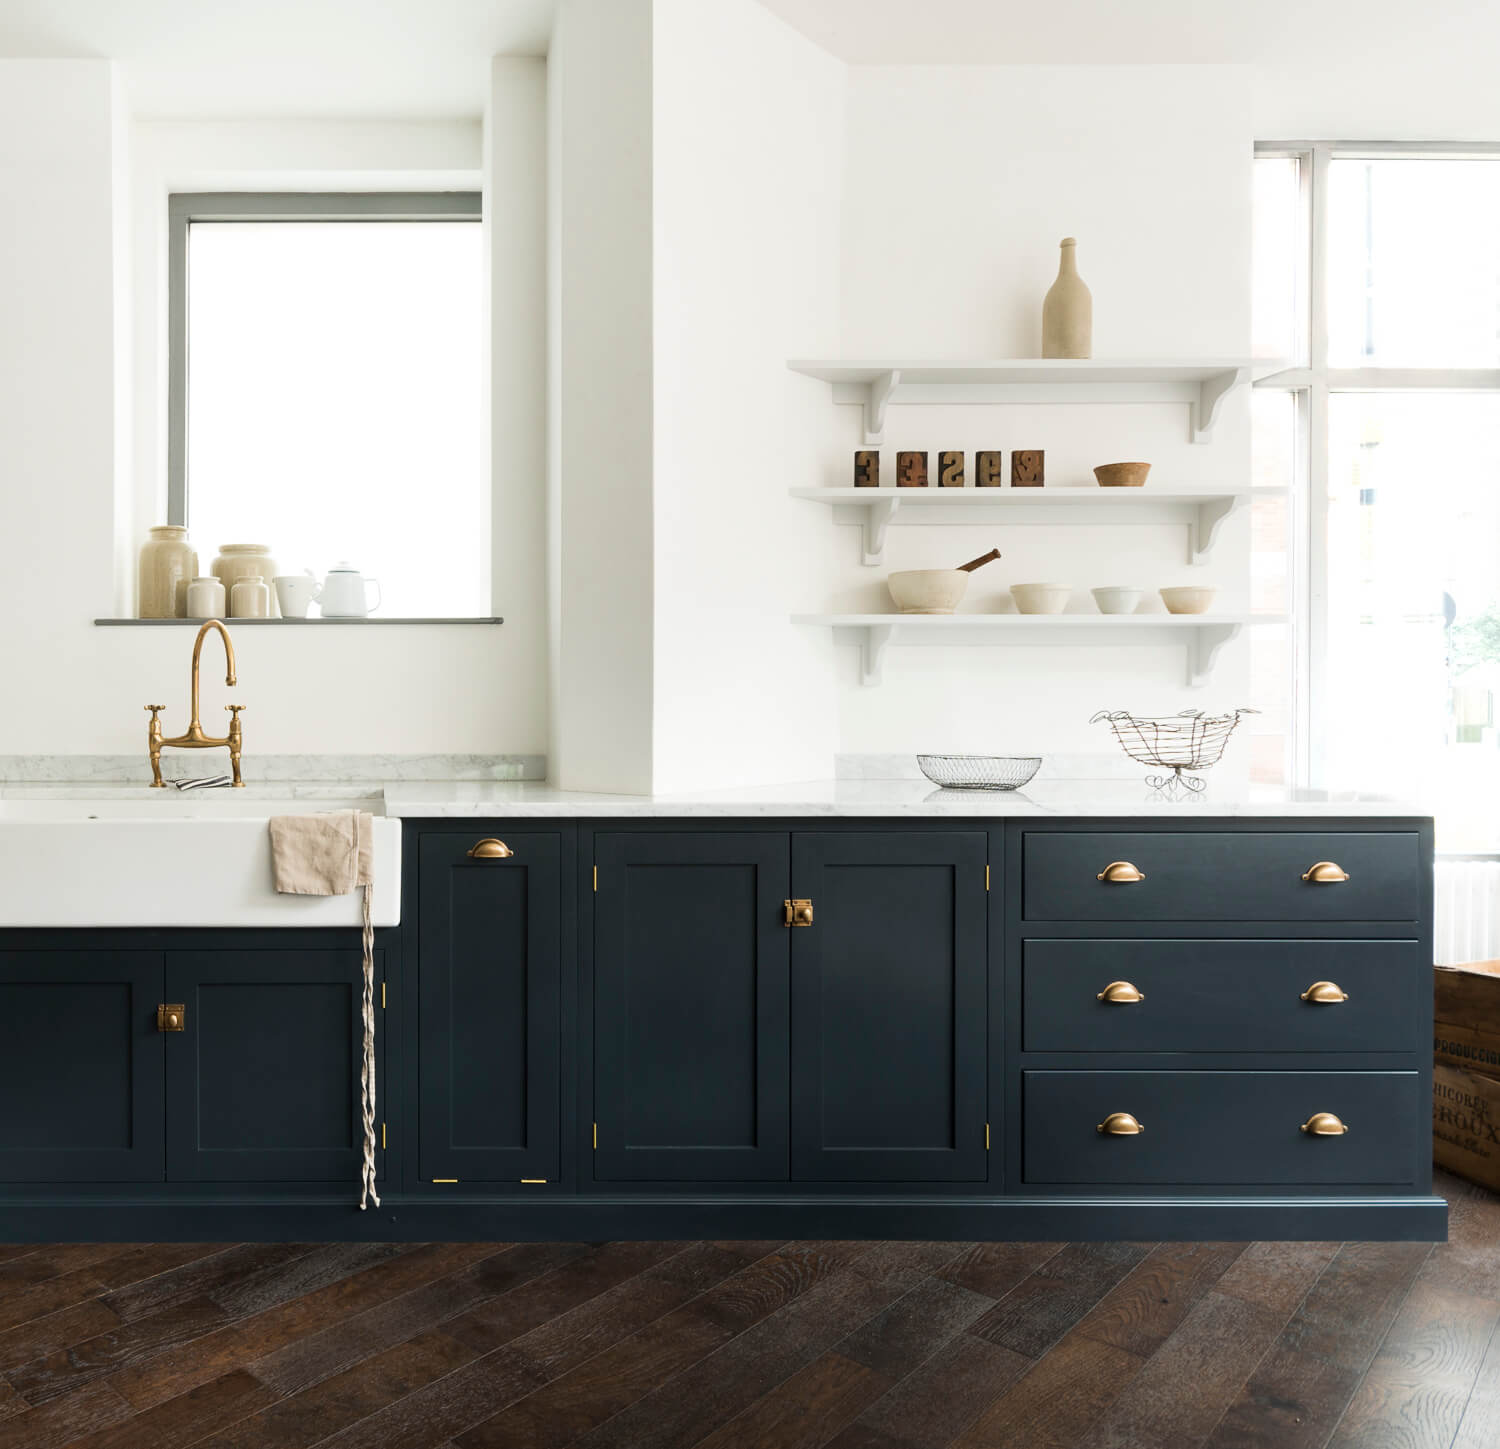 Before 8.TheRealShakerKitchen deVOL LOW RES A Warm Makeover For A deVOL Shaker Kitchen